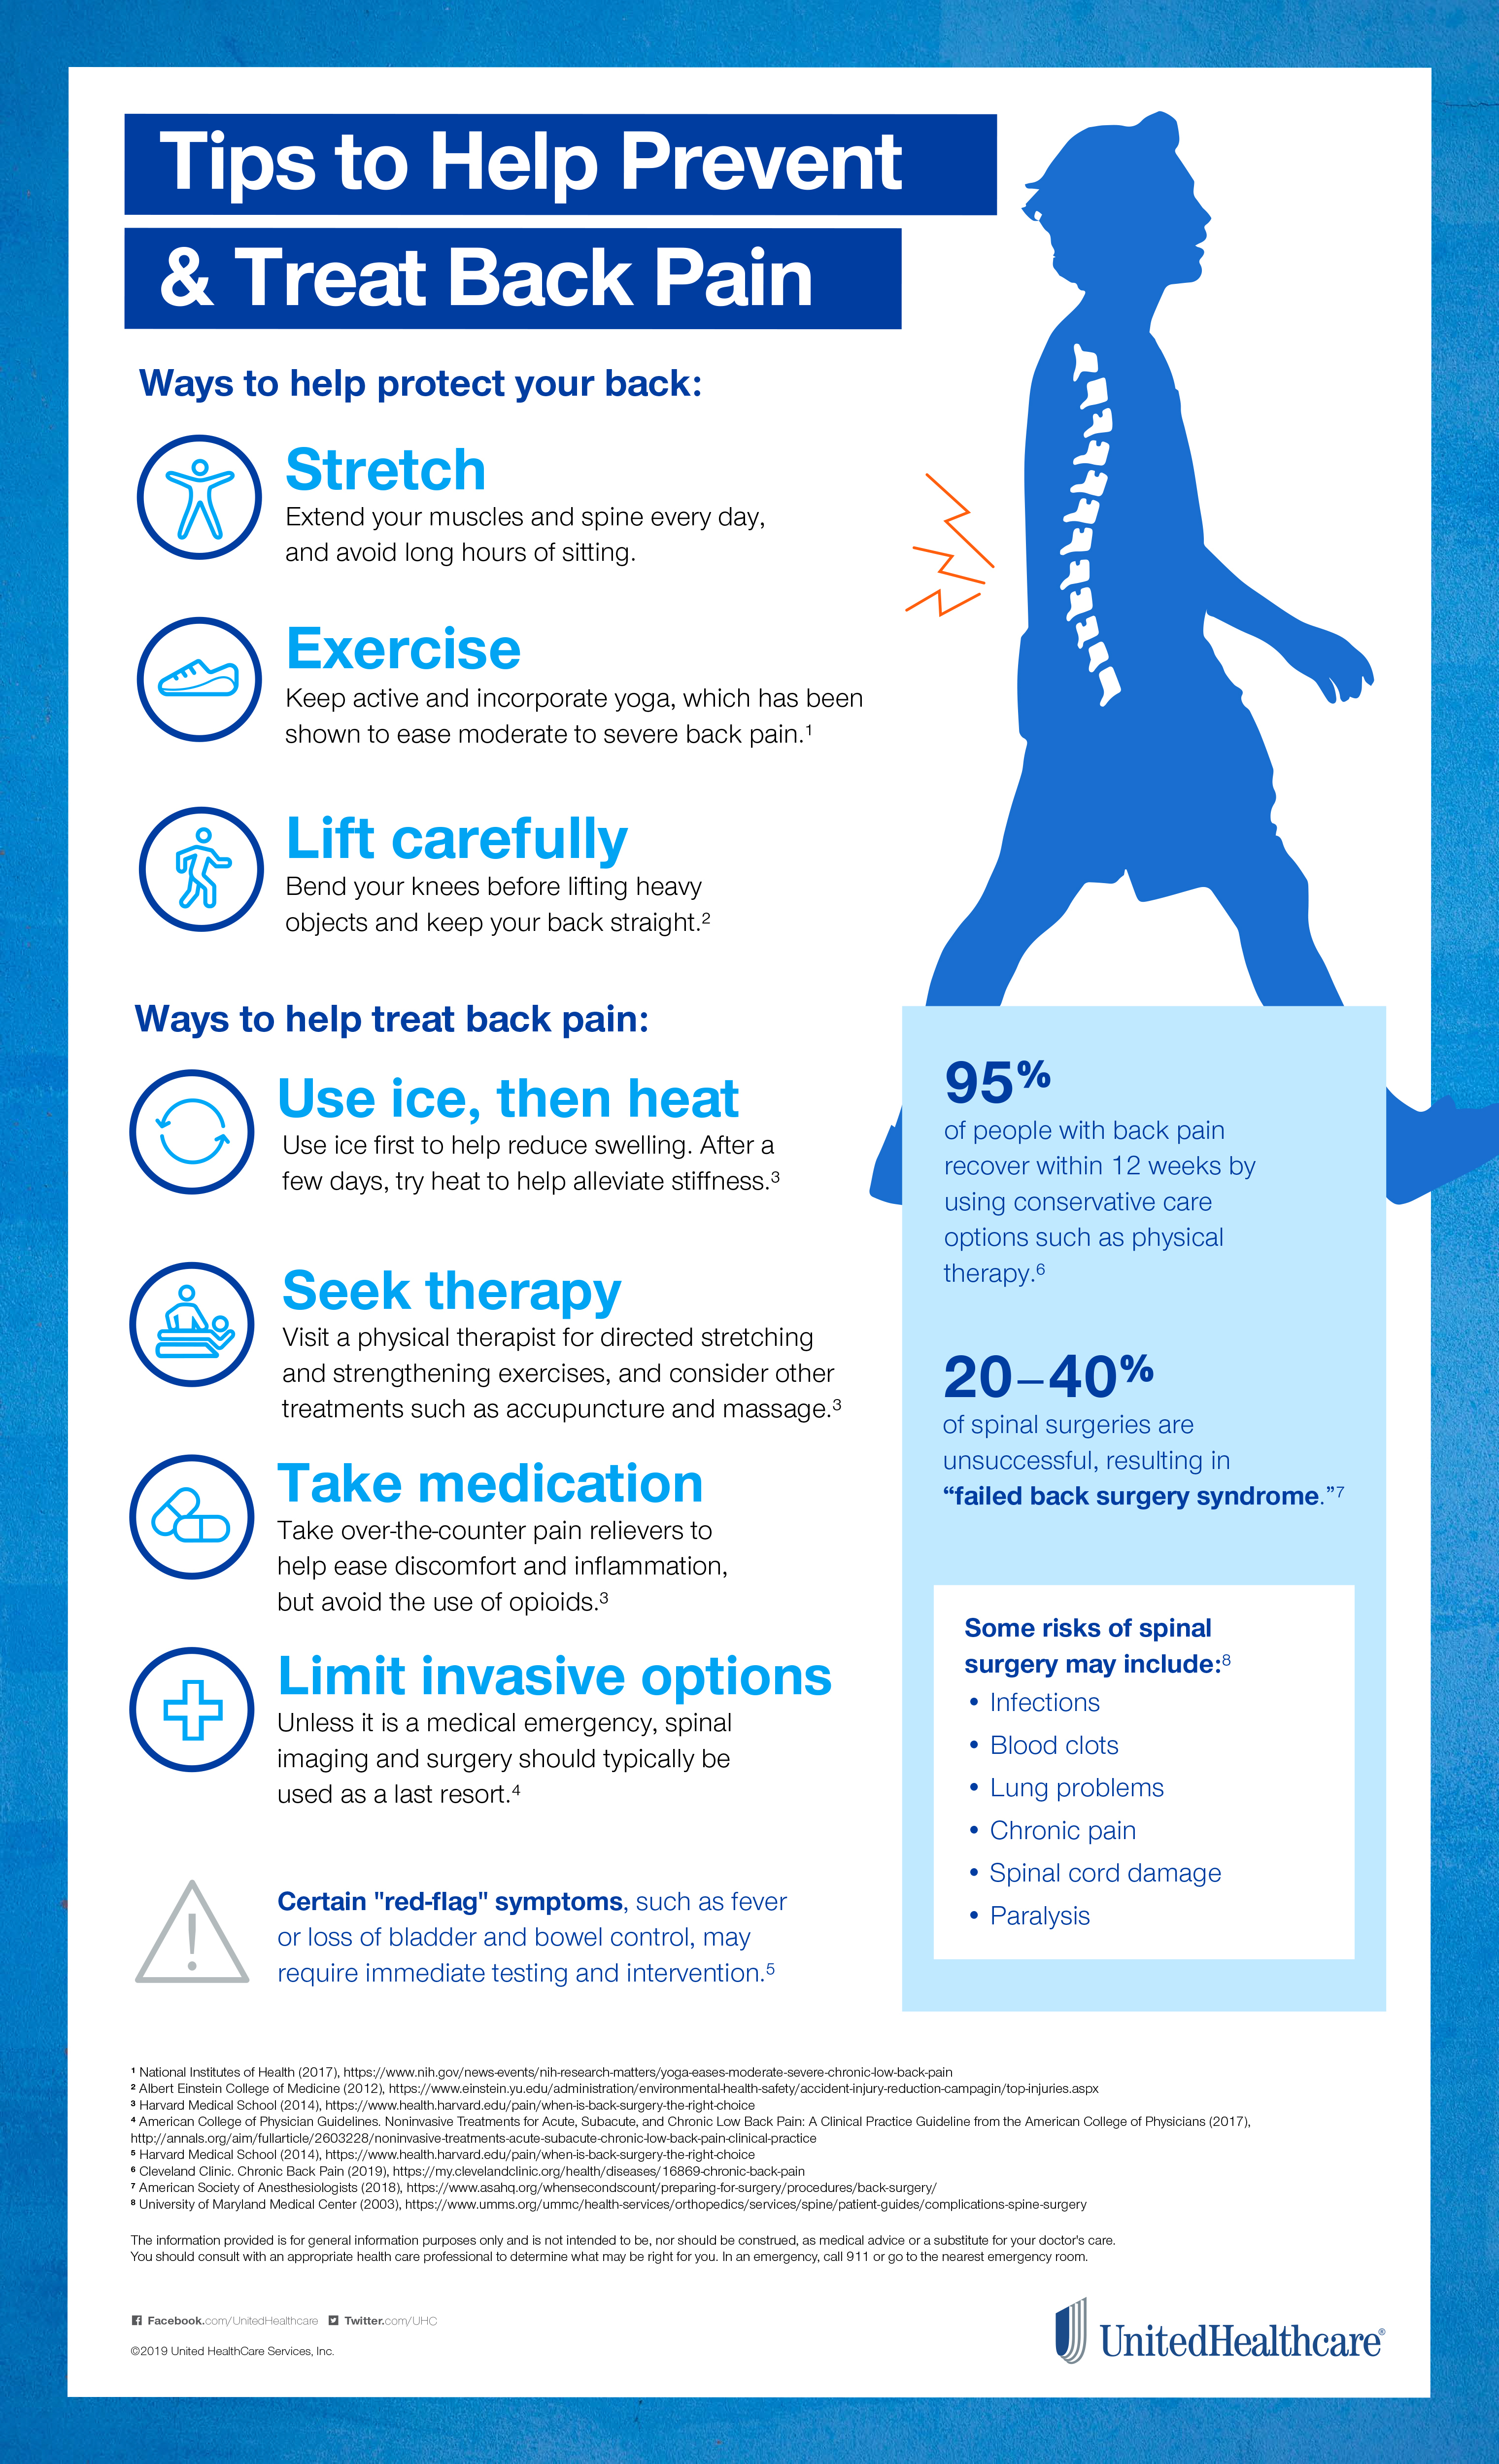 Daily moves to prevent low back pain - Harvard Health